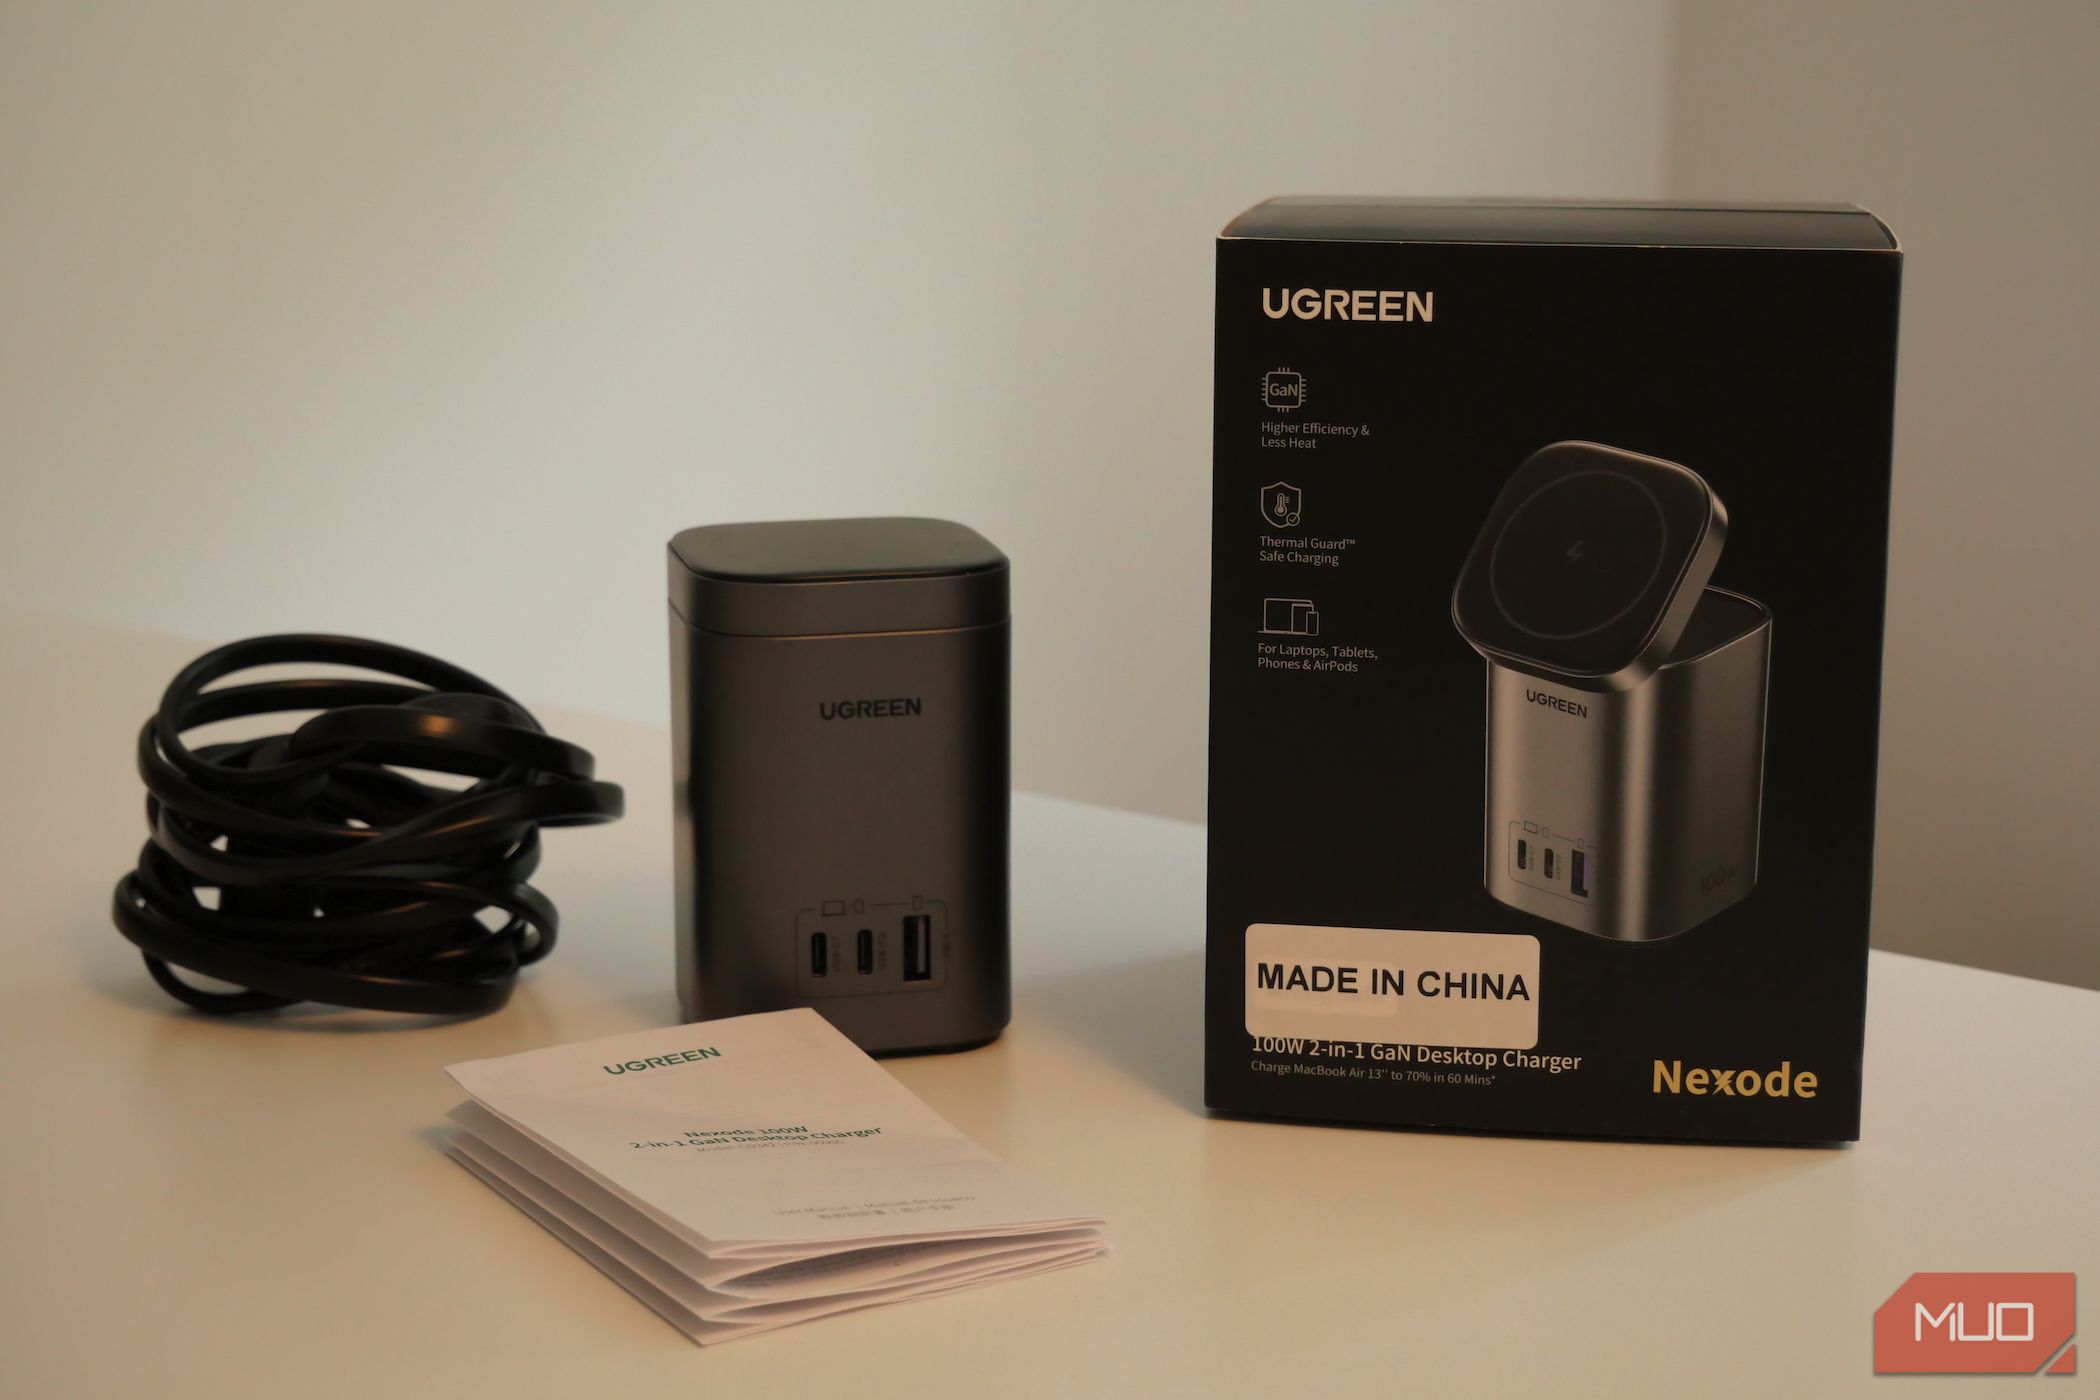 UGREEN GaN 100W Fast Charger - Unboxing & Review 